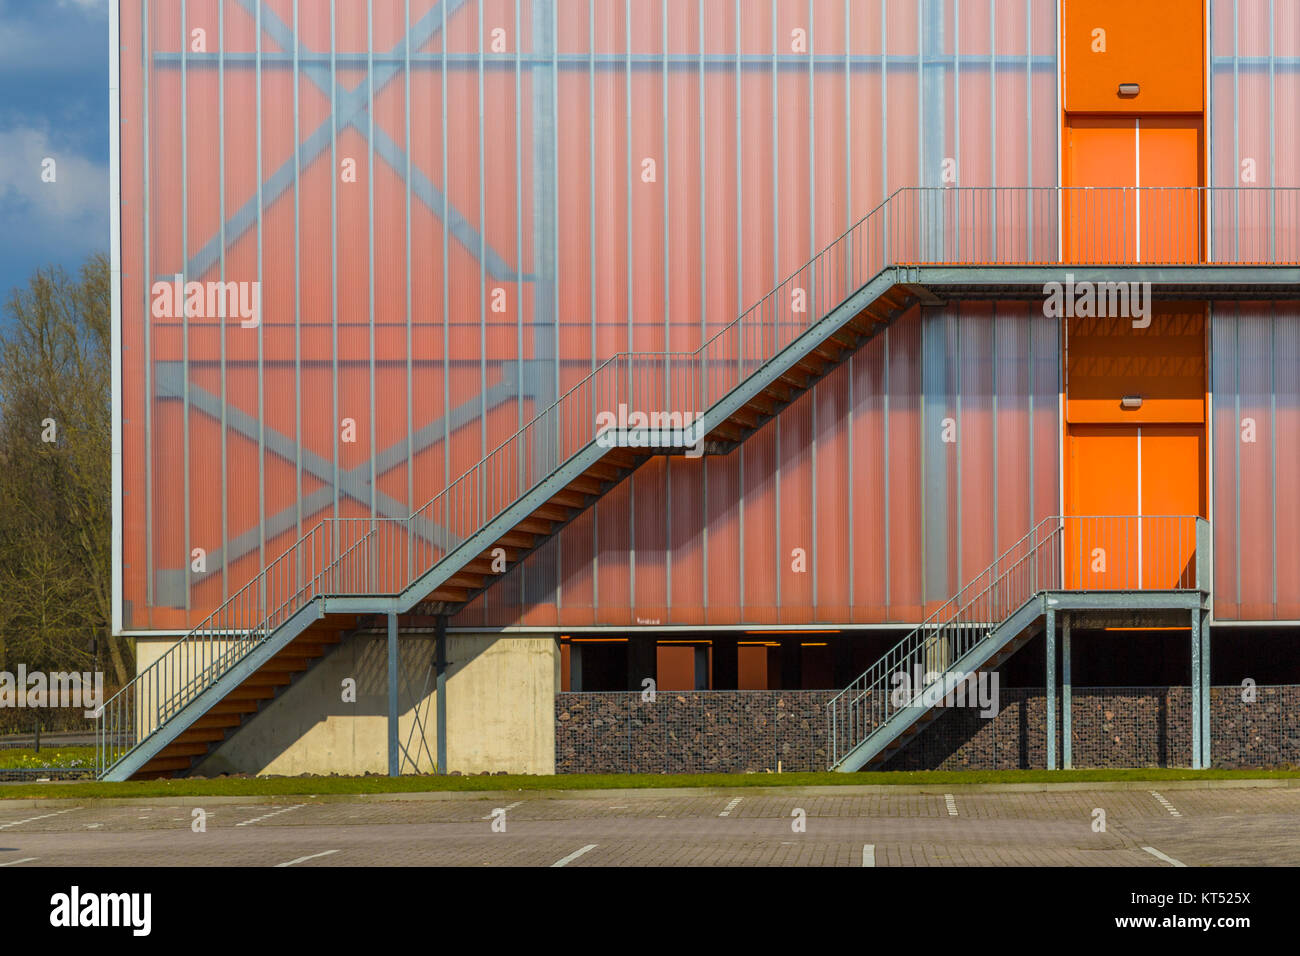 Modern building facade with Emergency exit escape ladder on the exterior Stock Photo